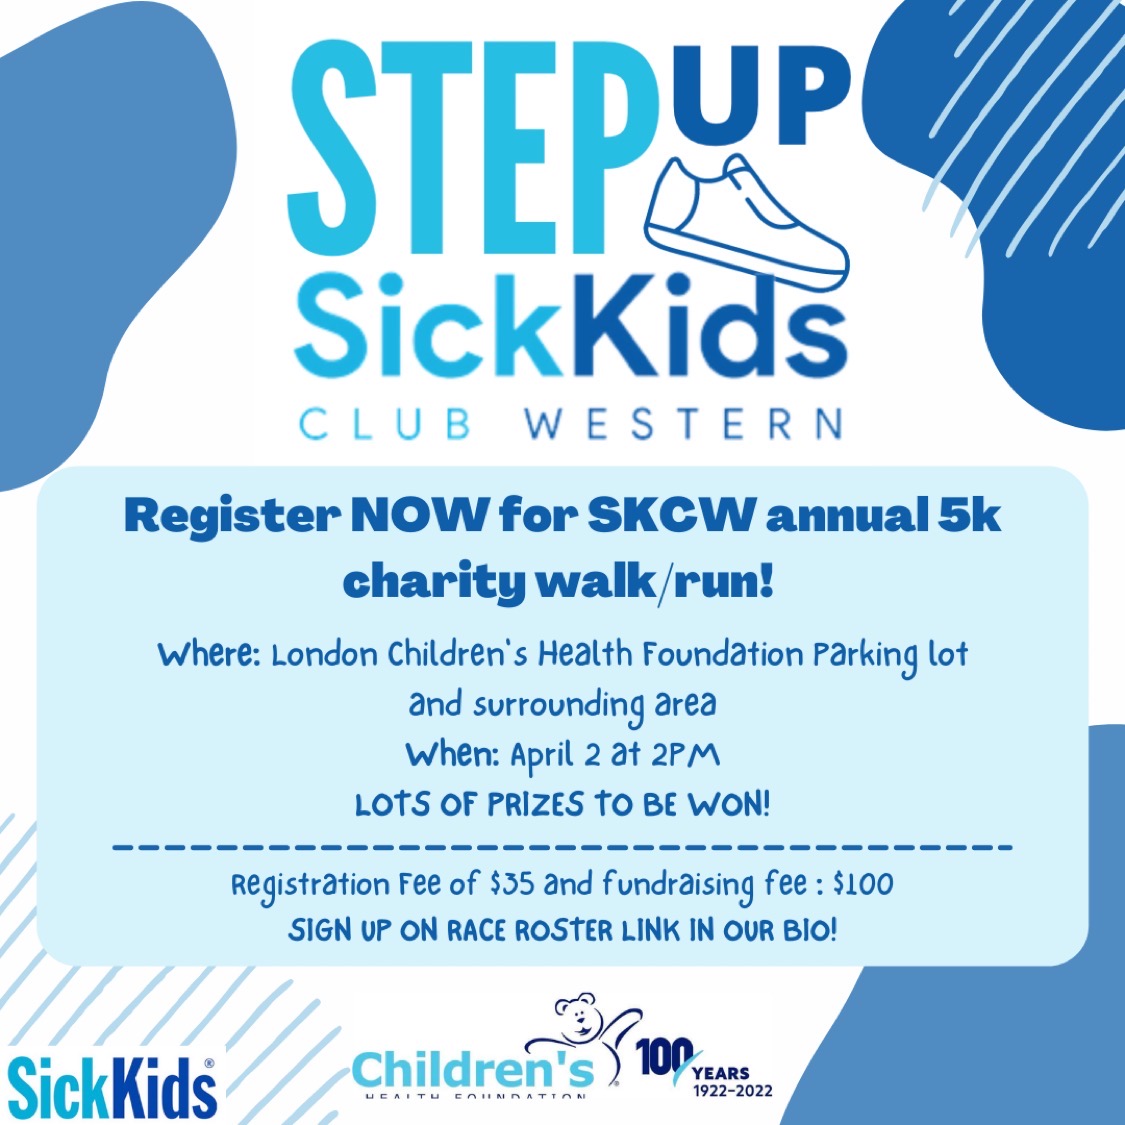 Step Up with SickKids Club Western is back! This is a 5km walking and running event in support of London Children’s Hospital and SickKids!